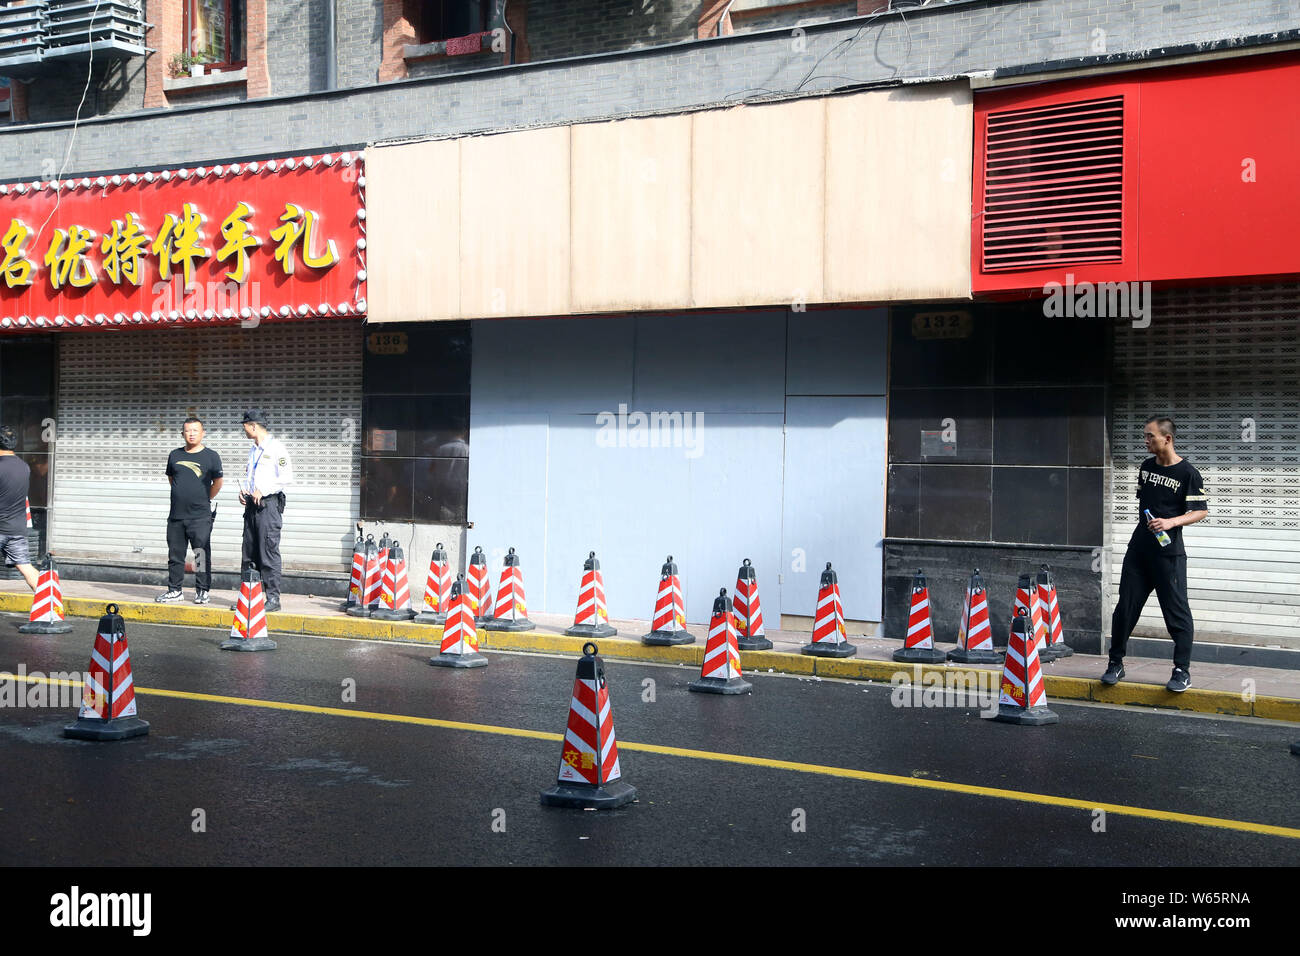 Security guards set up a cordoned-off area in front of the souvenir shop after its signboard collapsed, killing 3 people and injuring 6 others, on Eas Stock Photo